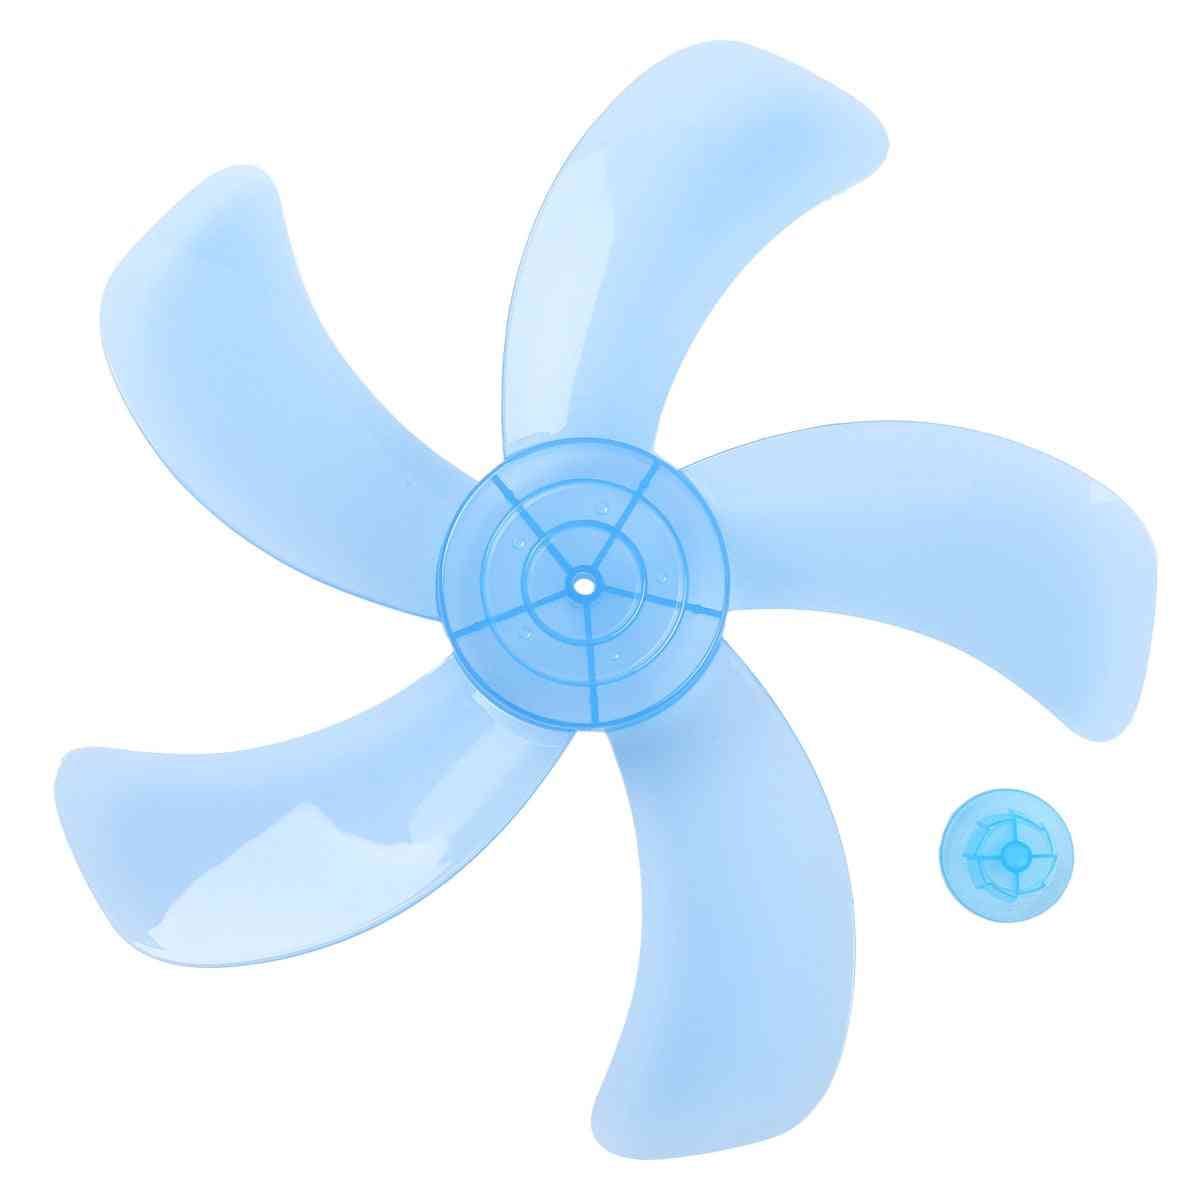 Household Fan Blade Three/five Leave Plastic Impellor With Nut Cover